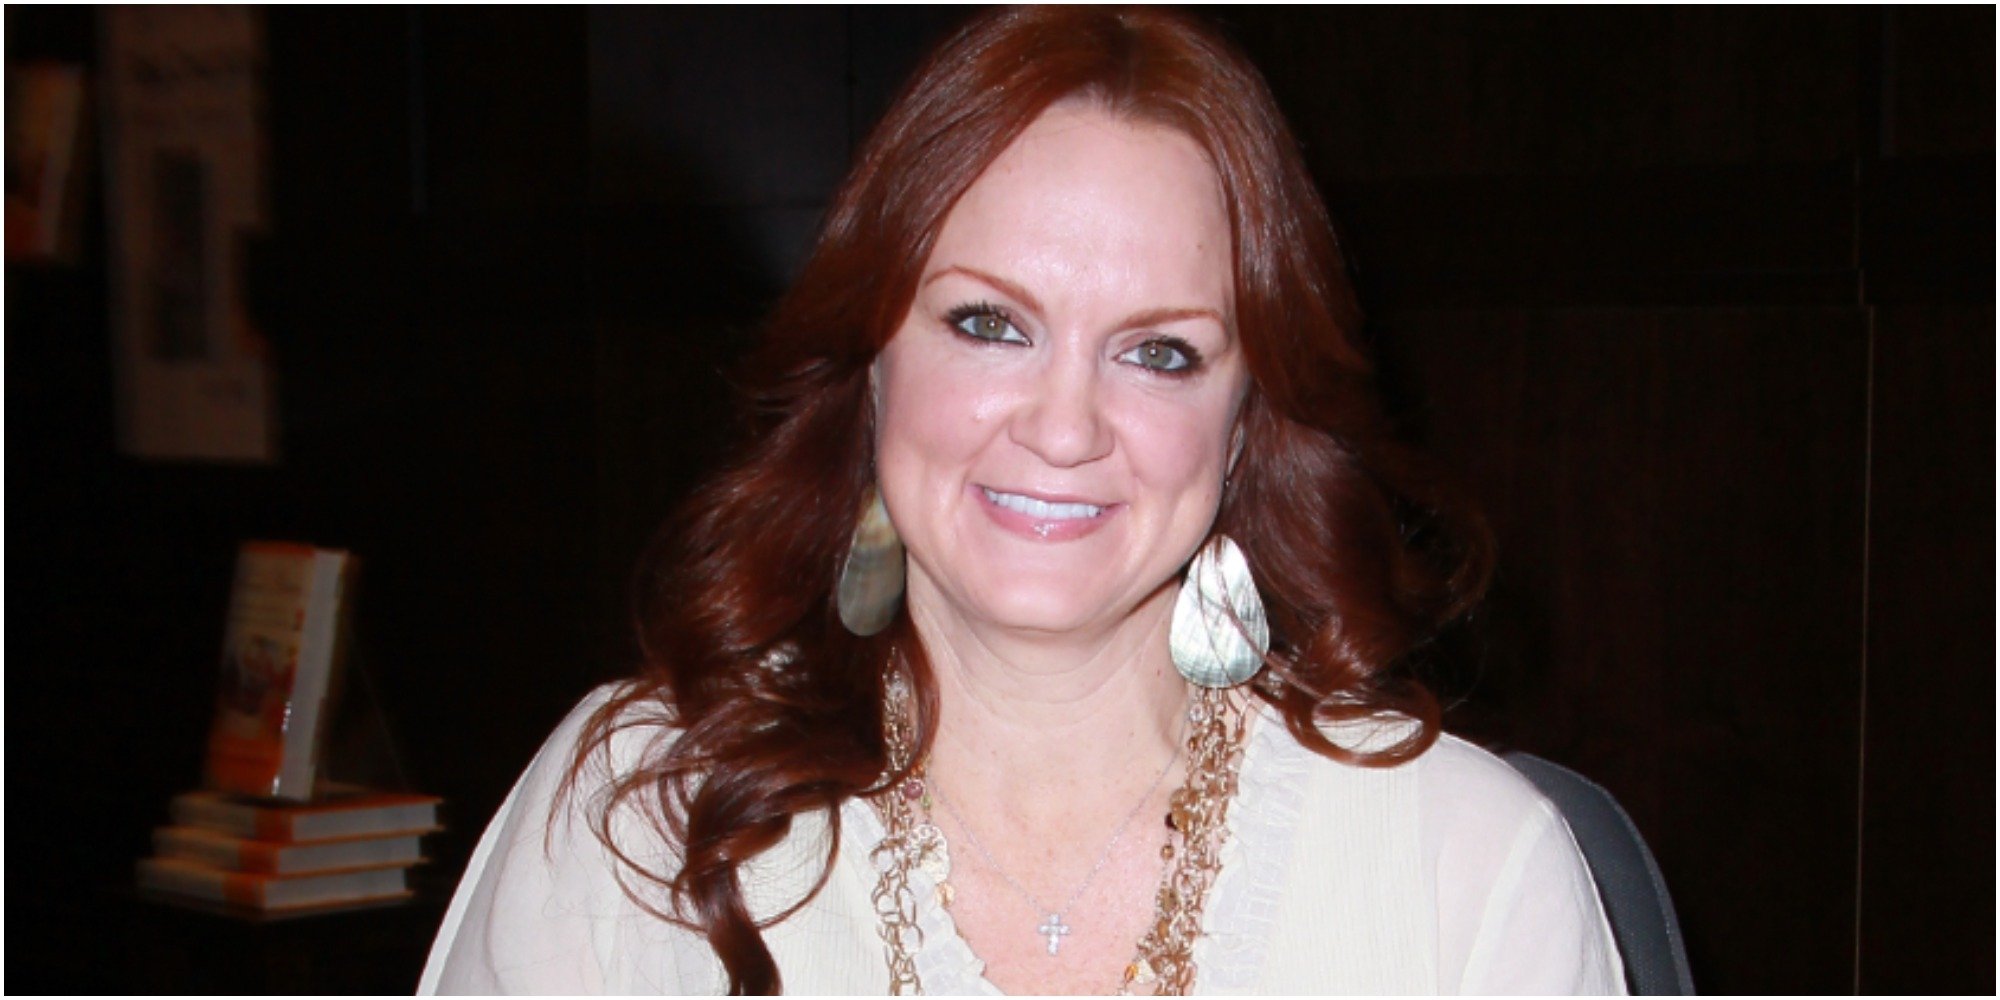 Ree Drummond wears a white shirt at a book signing.